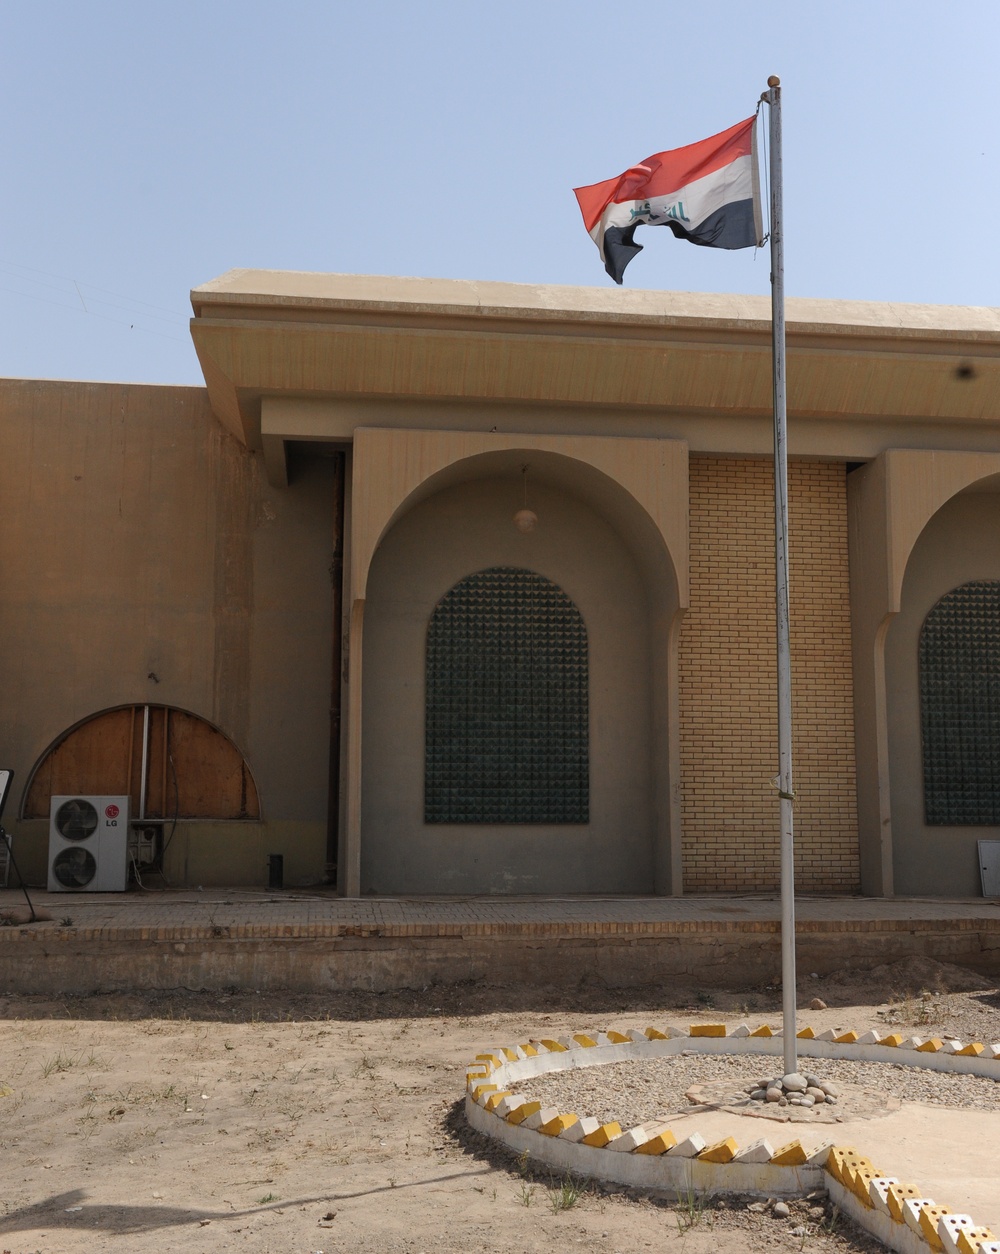 Transfer of Joint Security Station Cash to Iraqi control in Baghdad, Iraq